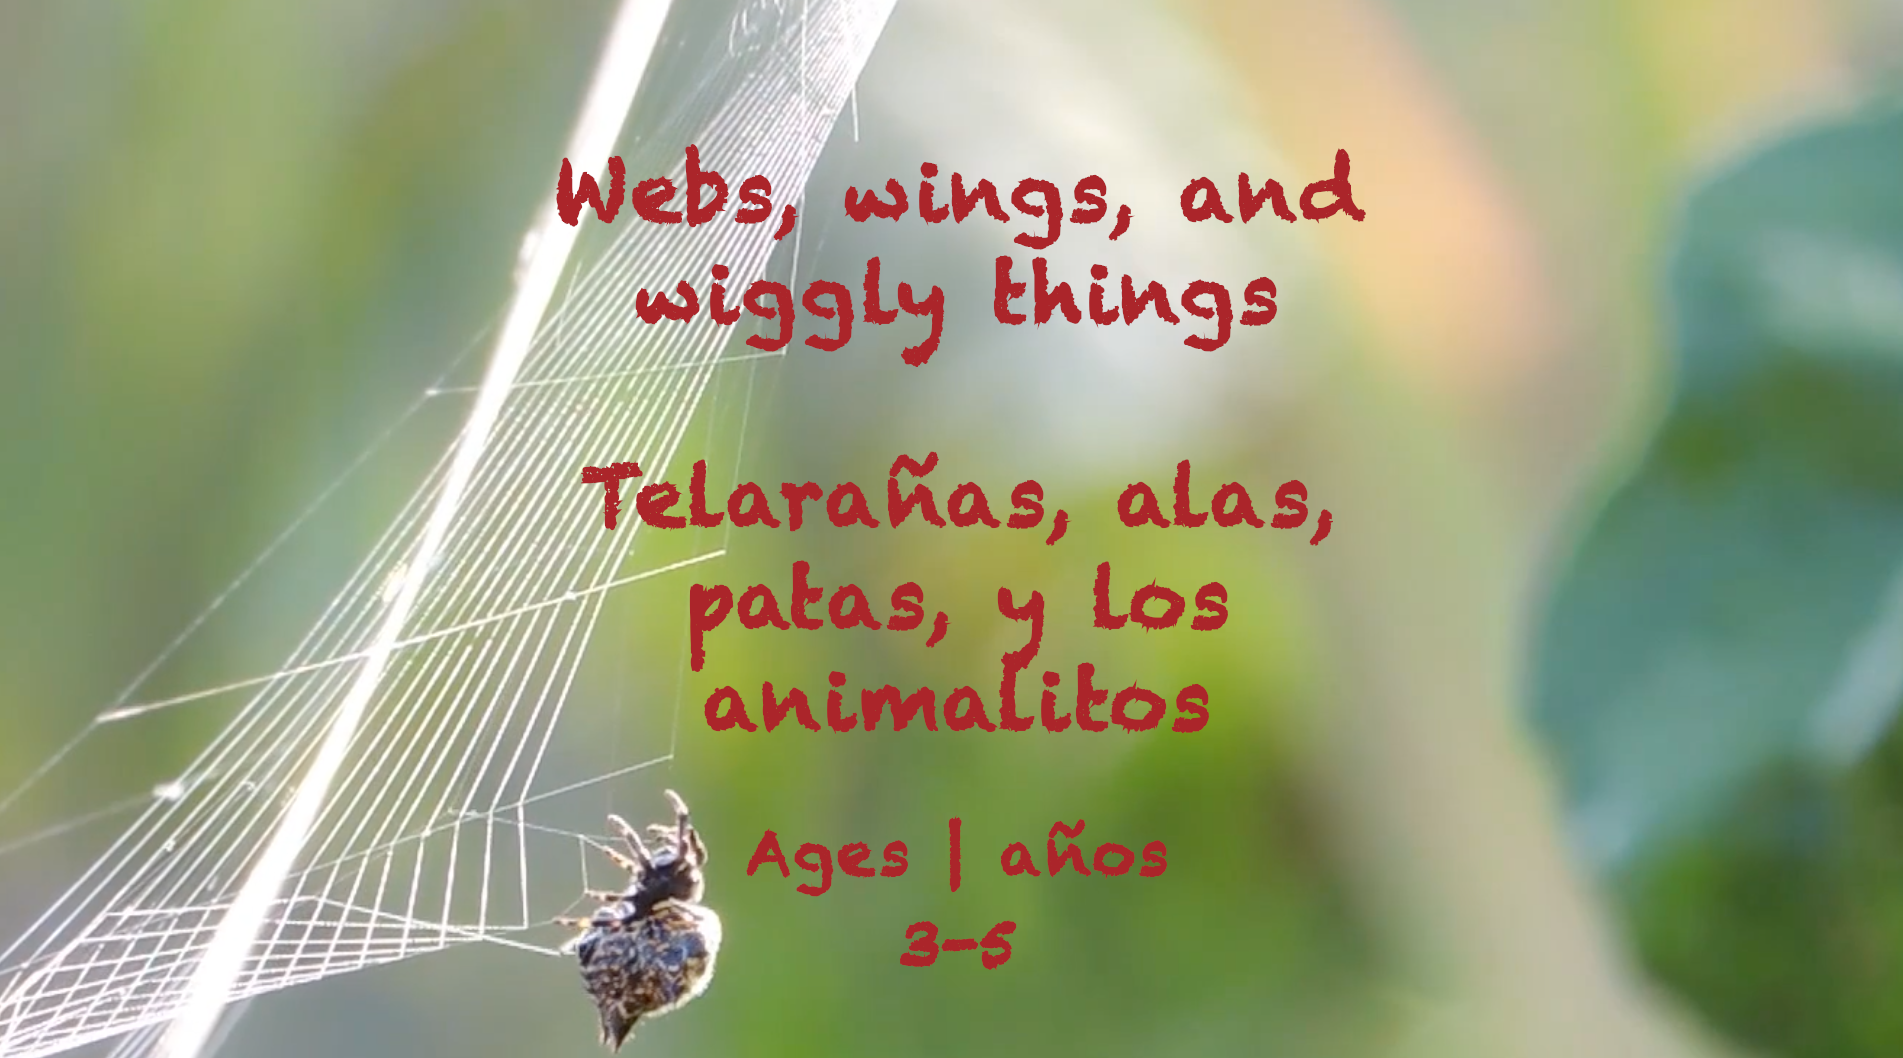 Webs, Wings, and Wiggly Things for 3-5 year olds